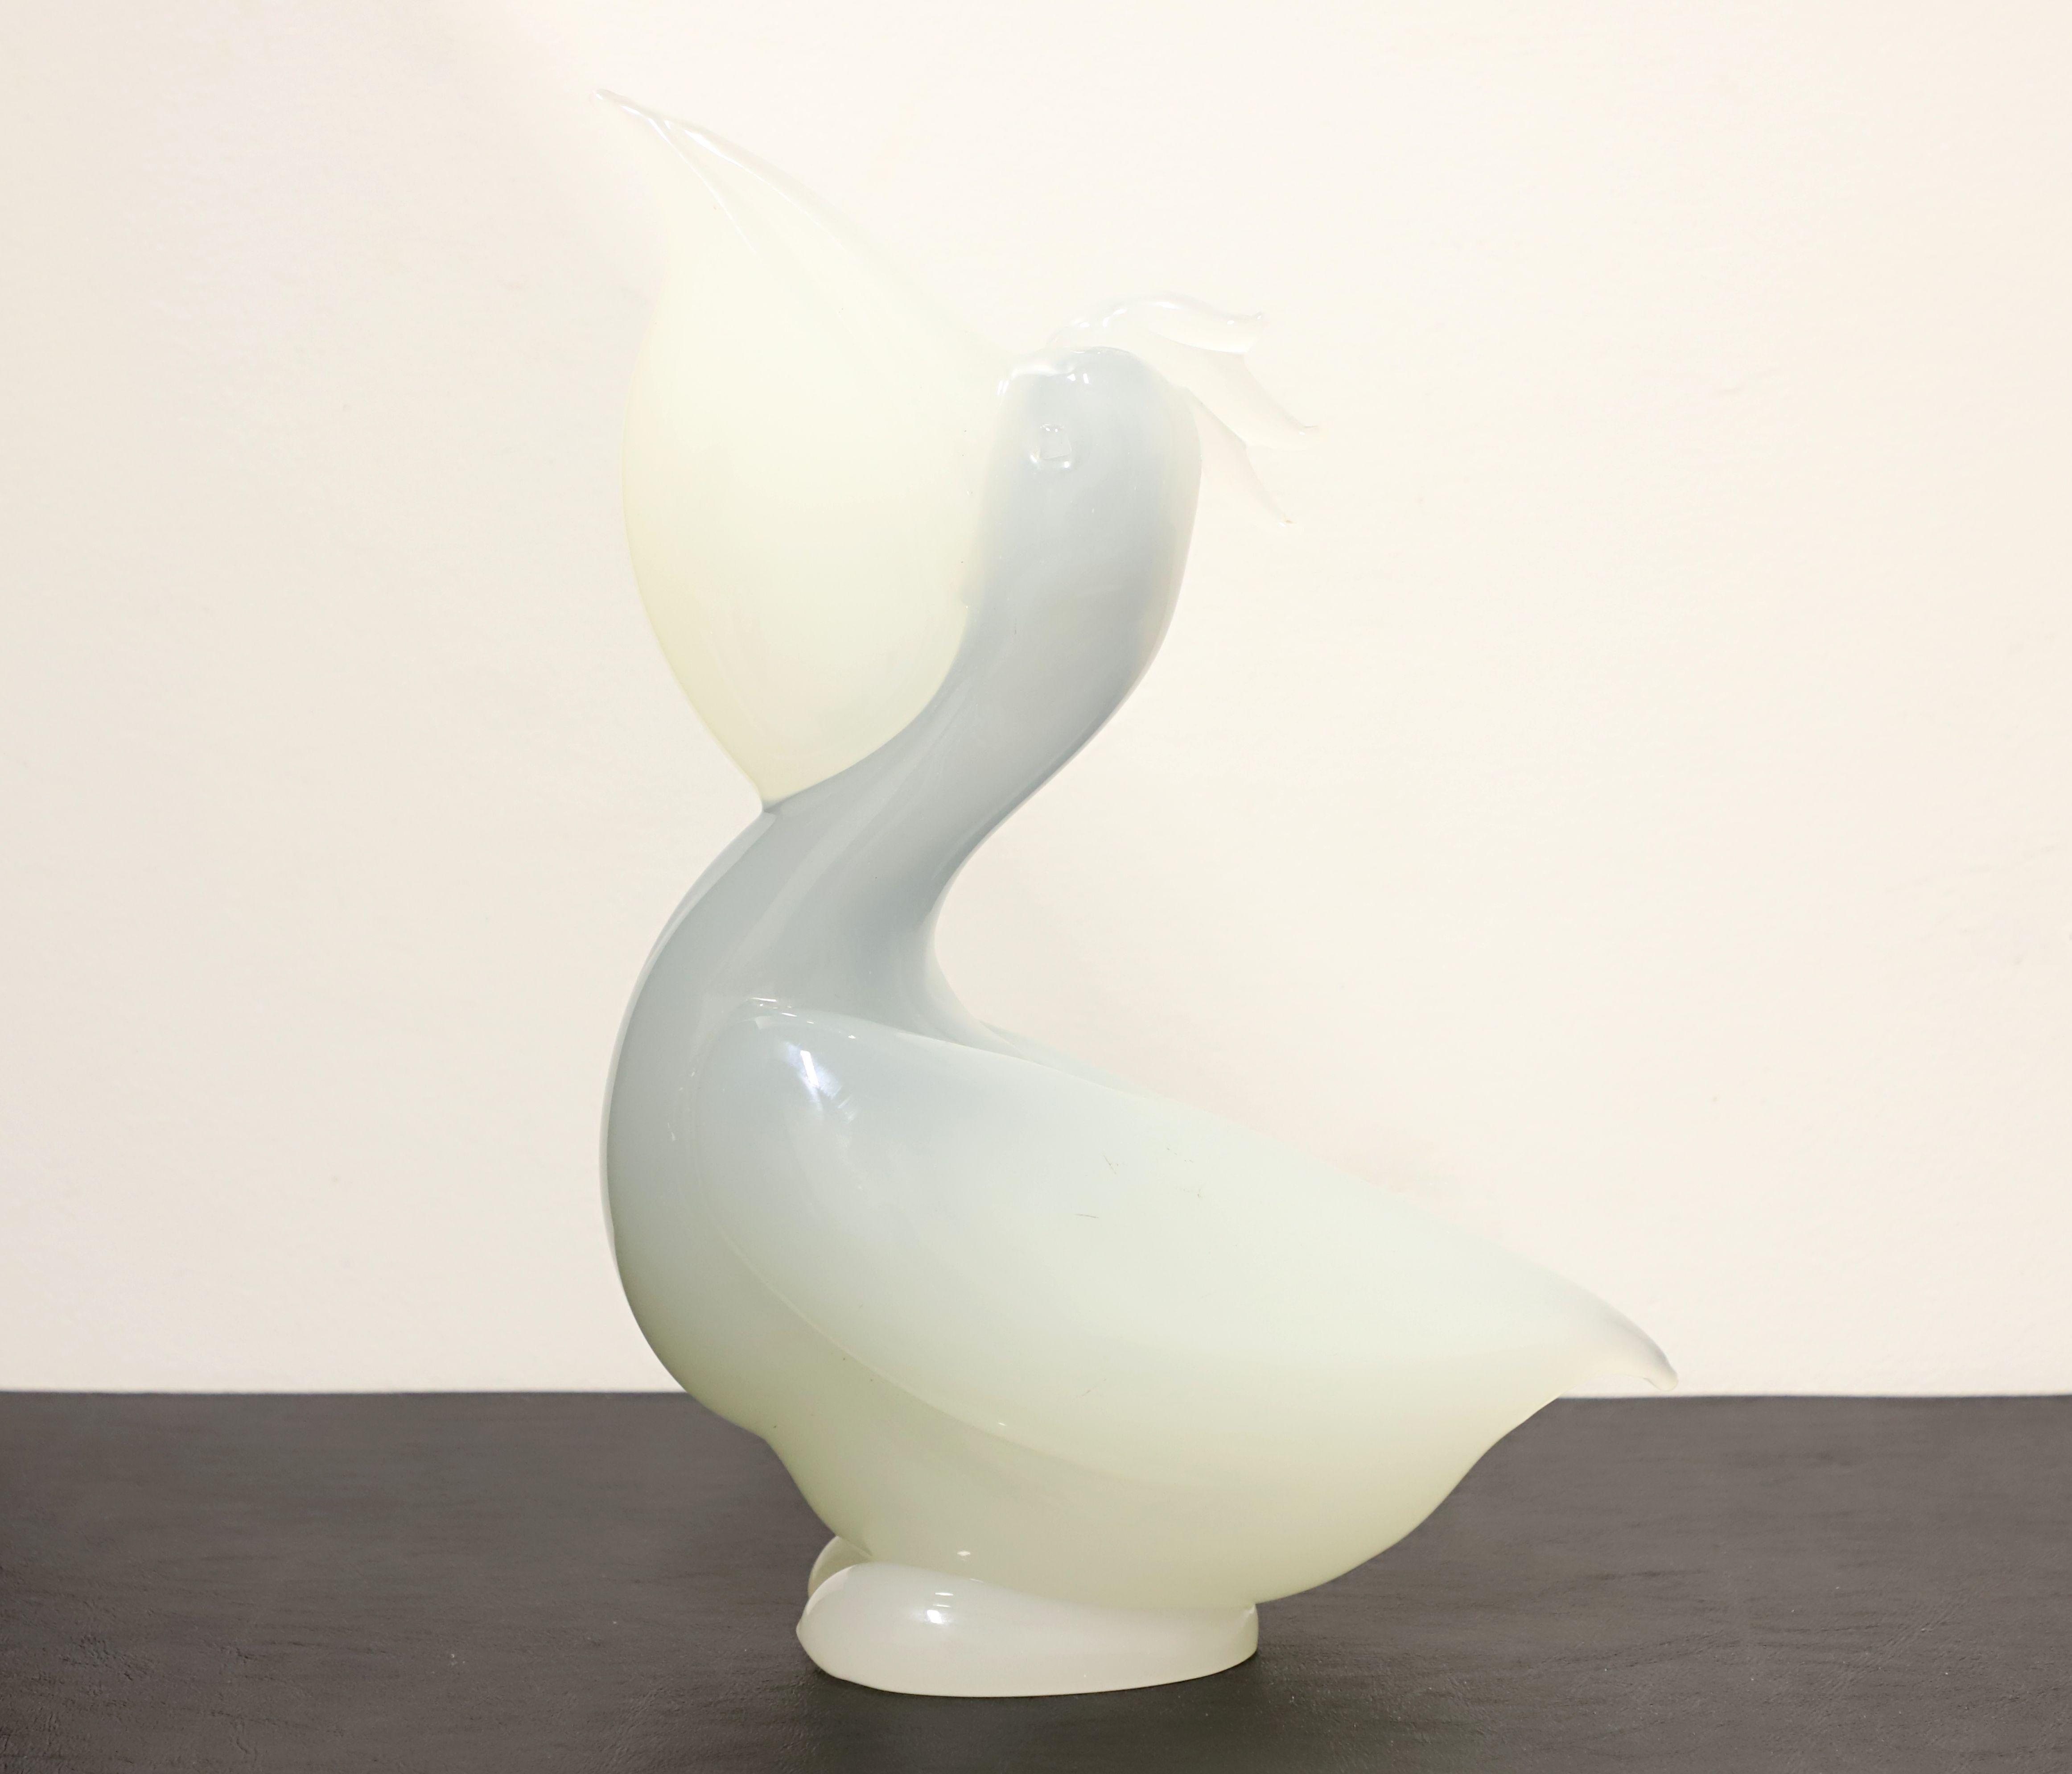 A Contemporary style art glass sculpture, unsigned, attributed to Gambaro & Poggi, of Murano. Opaque alabaster glass in shades of blue and white forming a pelican. Made in Italy, circa 1970's.

Measures: 9w 4d 12.75h, Weighs Approximately: 10 lbs